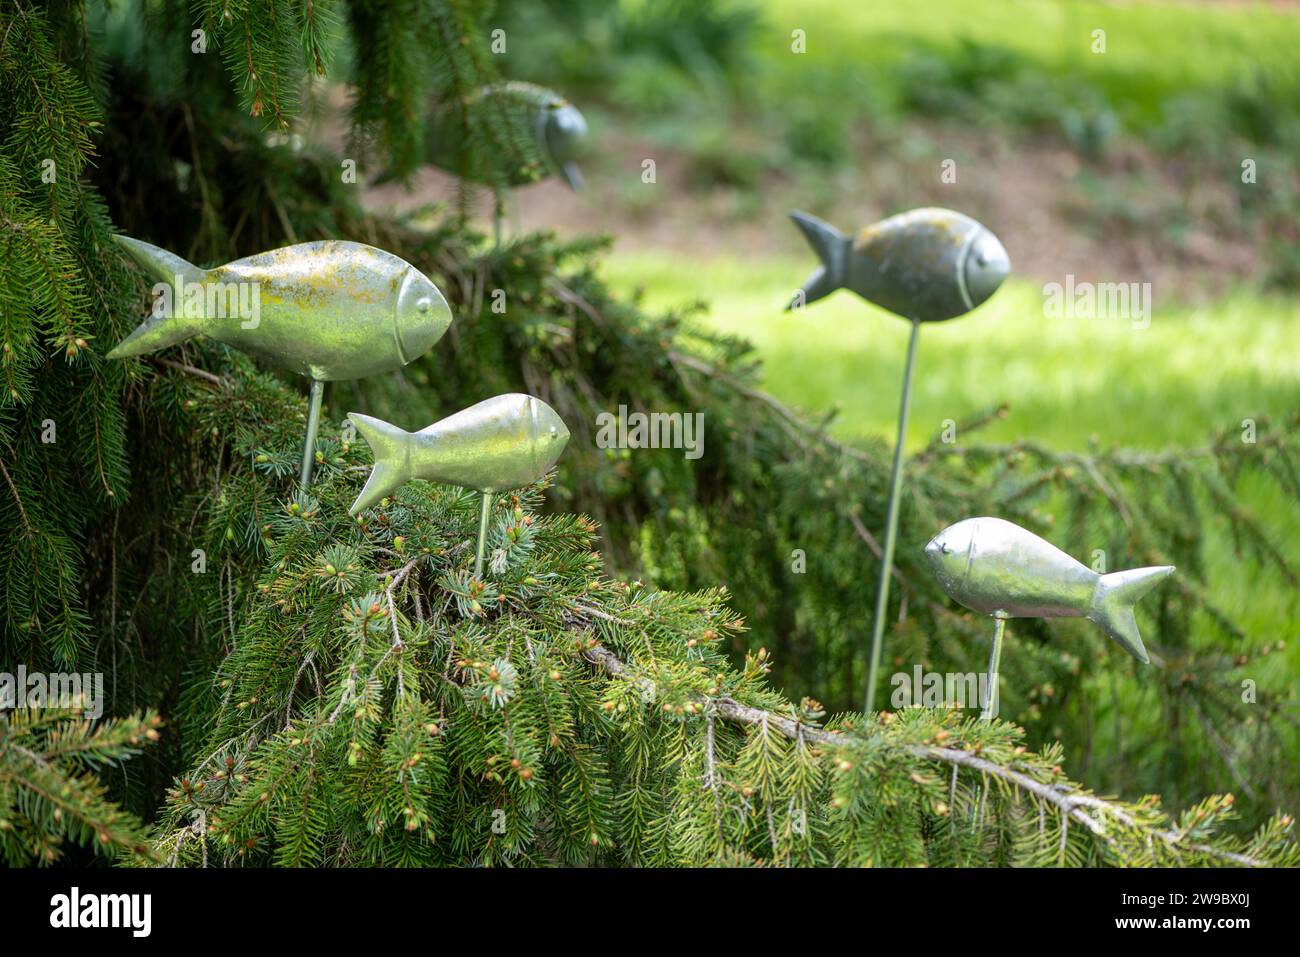 whimsy metal fish statues swimming in garden display Stock Photo